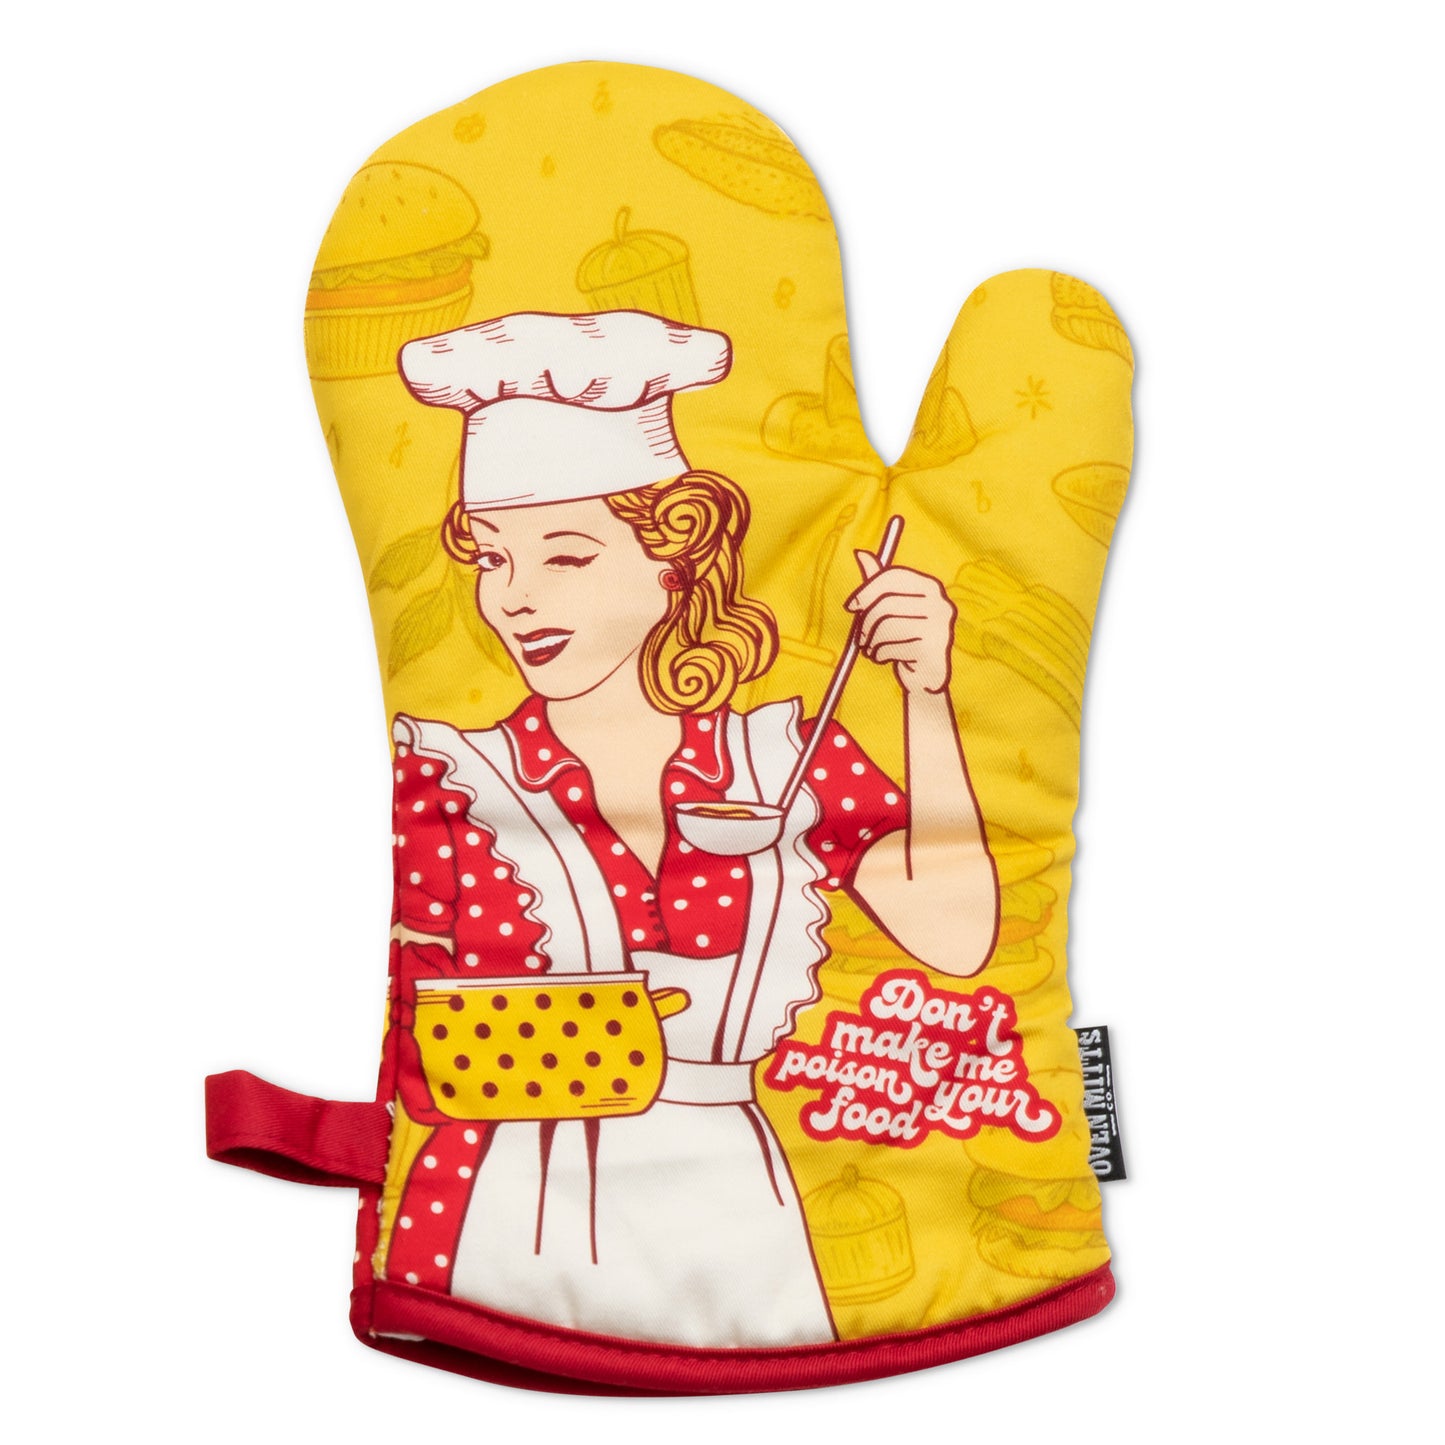 Don't Make Me Poison Your Food Oven Mitts And Potholder Set